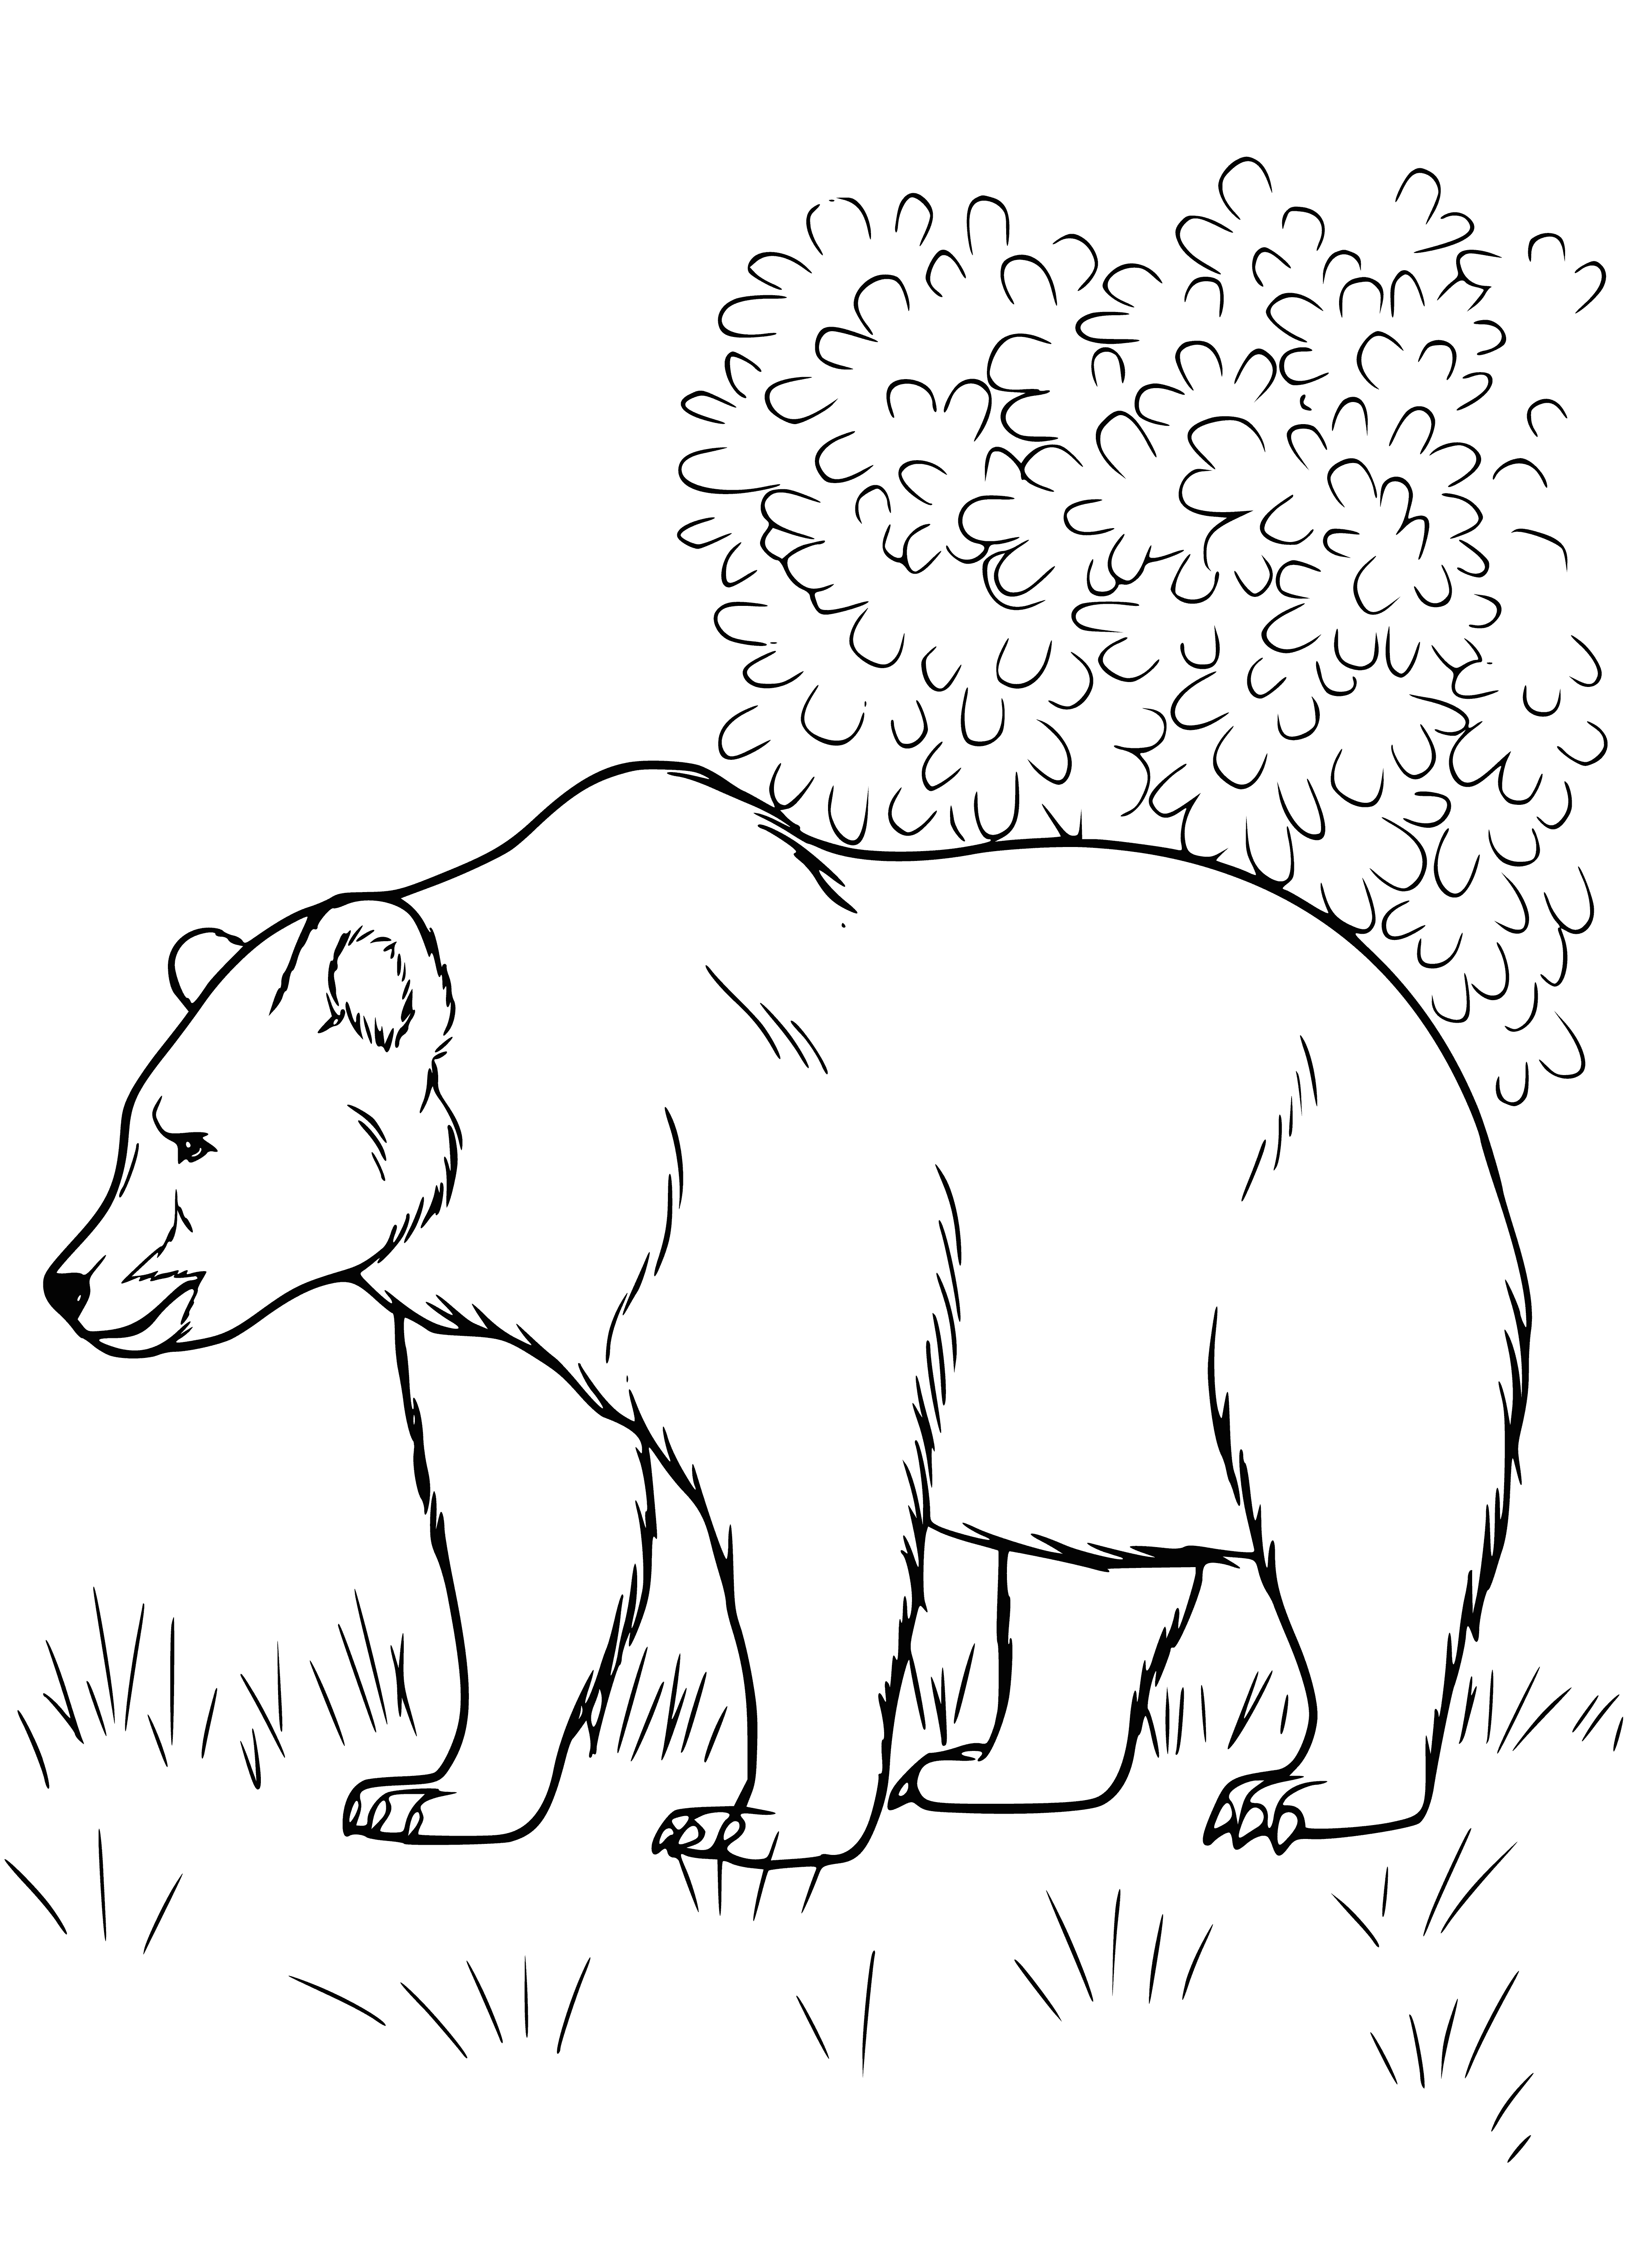 coloring page: Large furry brown creature stands in grassy field, yawning & perked-up. Small black eyes, long neck, big body, furry legs & tail.